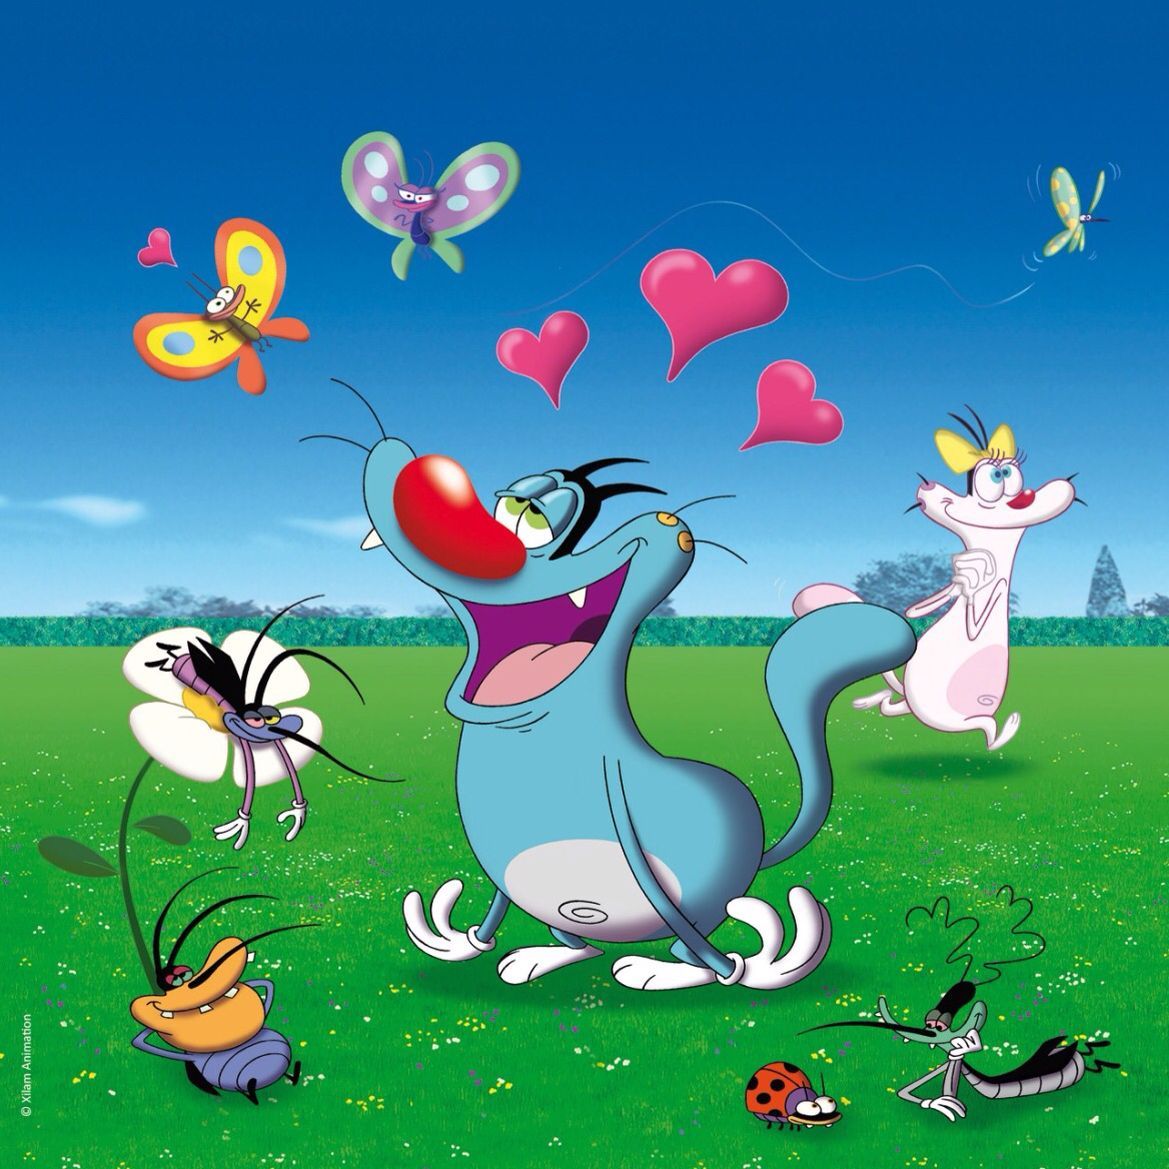 Oggy and the Cockroaches: one of the most hilarious cartoons yet!. Cartoon wallpaper iphone, Cartoon wallpaper, Cool cartoons